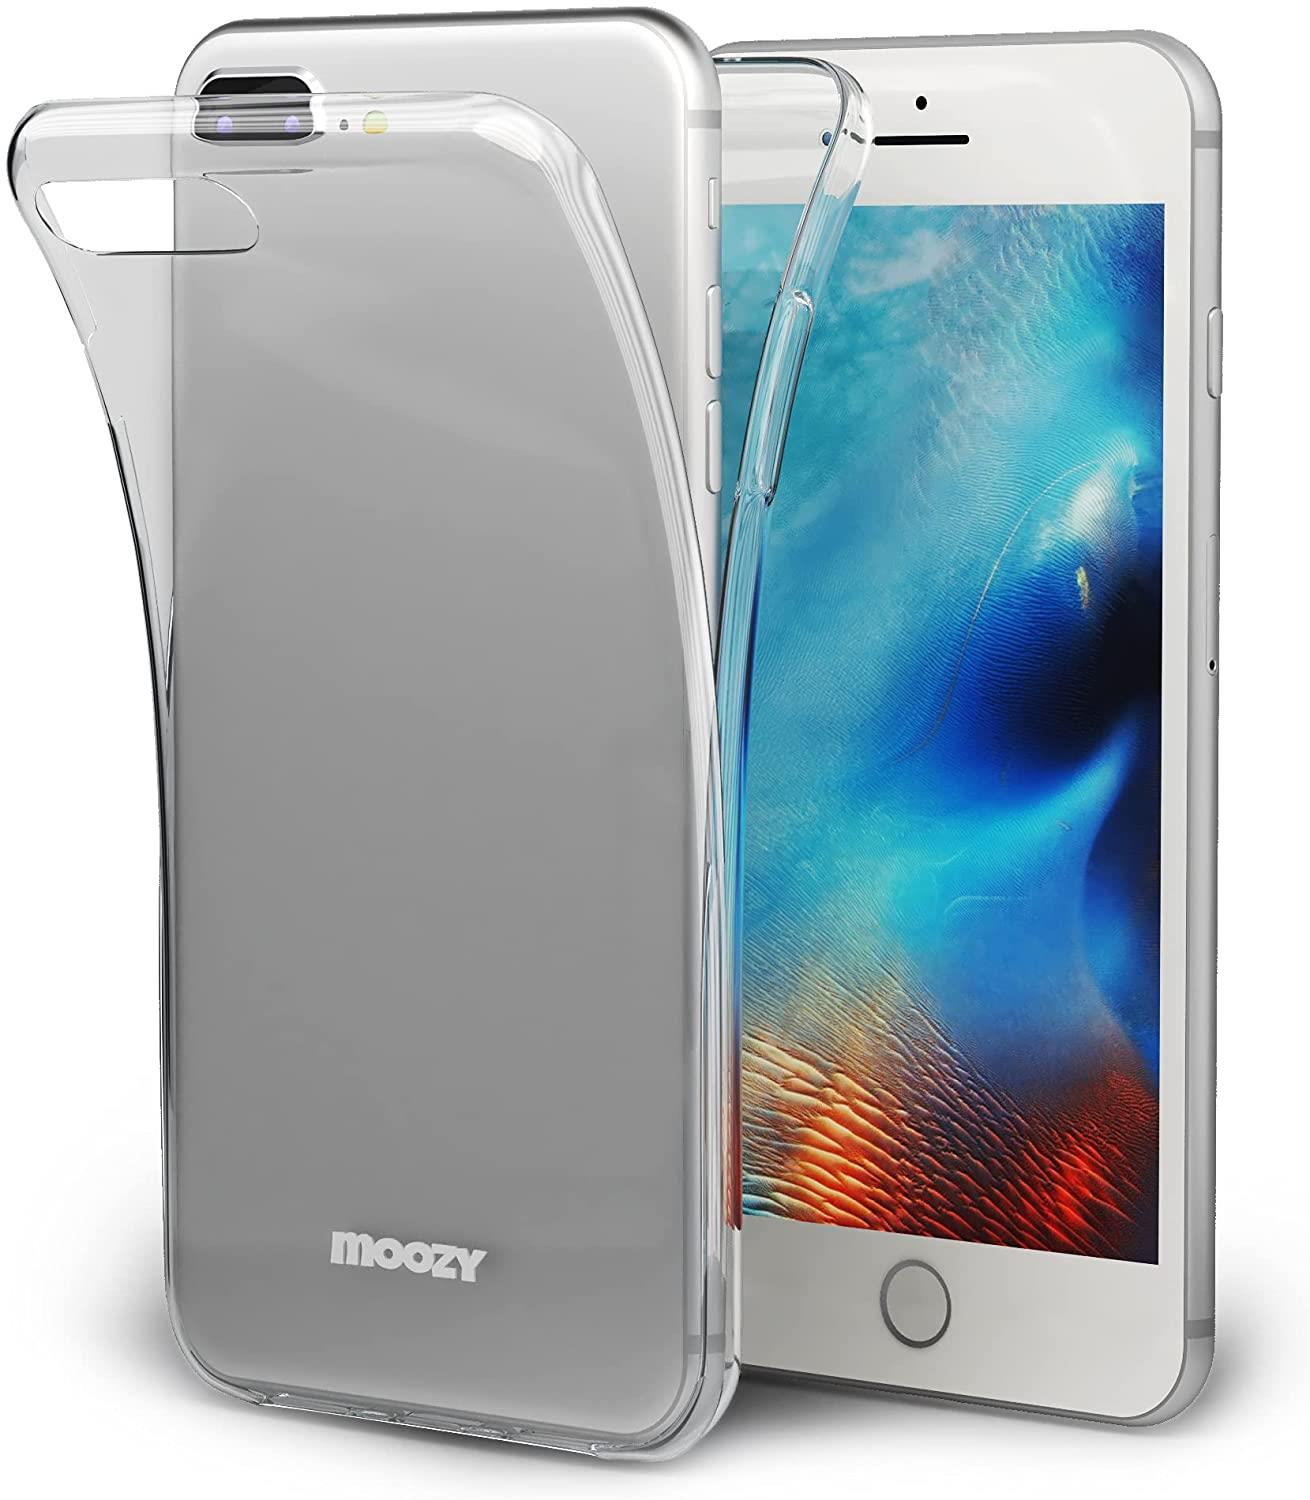 Moozy 360 Degree Case for iPhone 8 Plus, iPhone 7 Plus - Full body Front and Back Slim Clear Transparent TPU Silicone Gel Cover